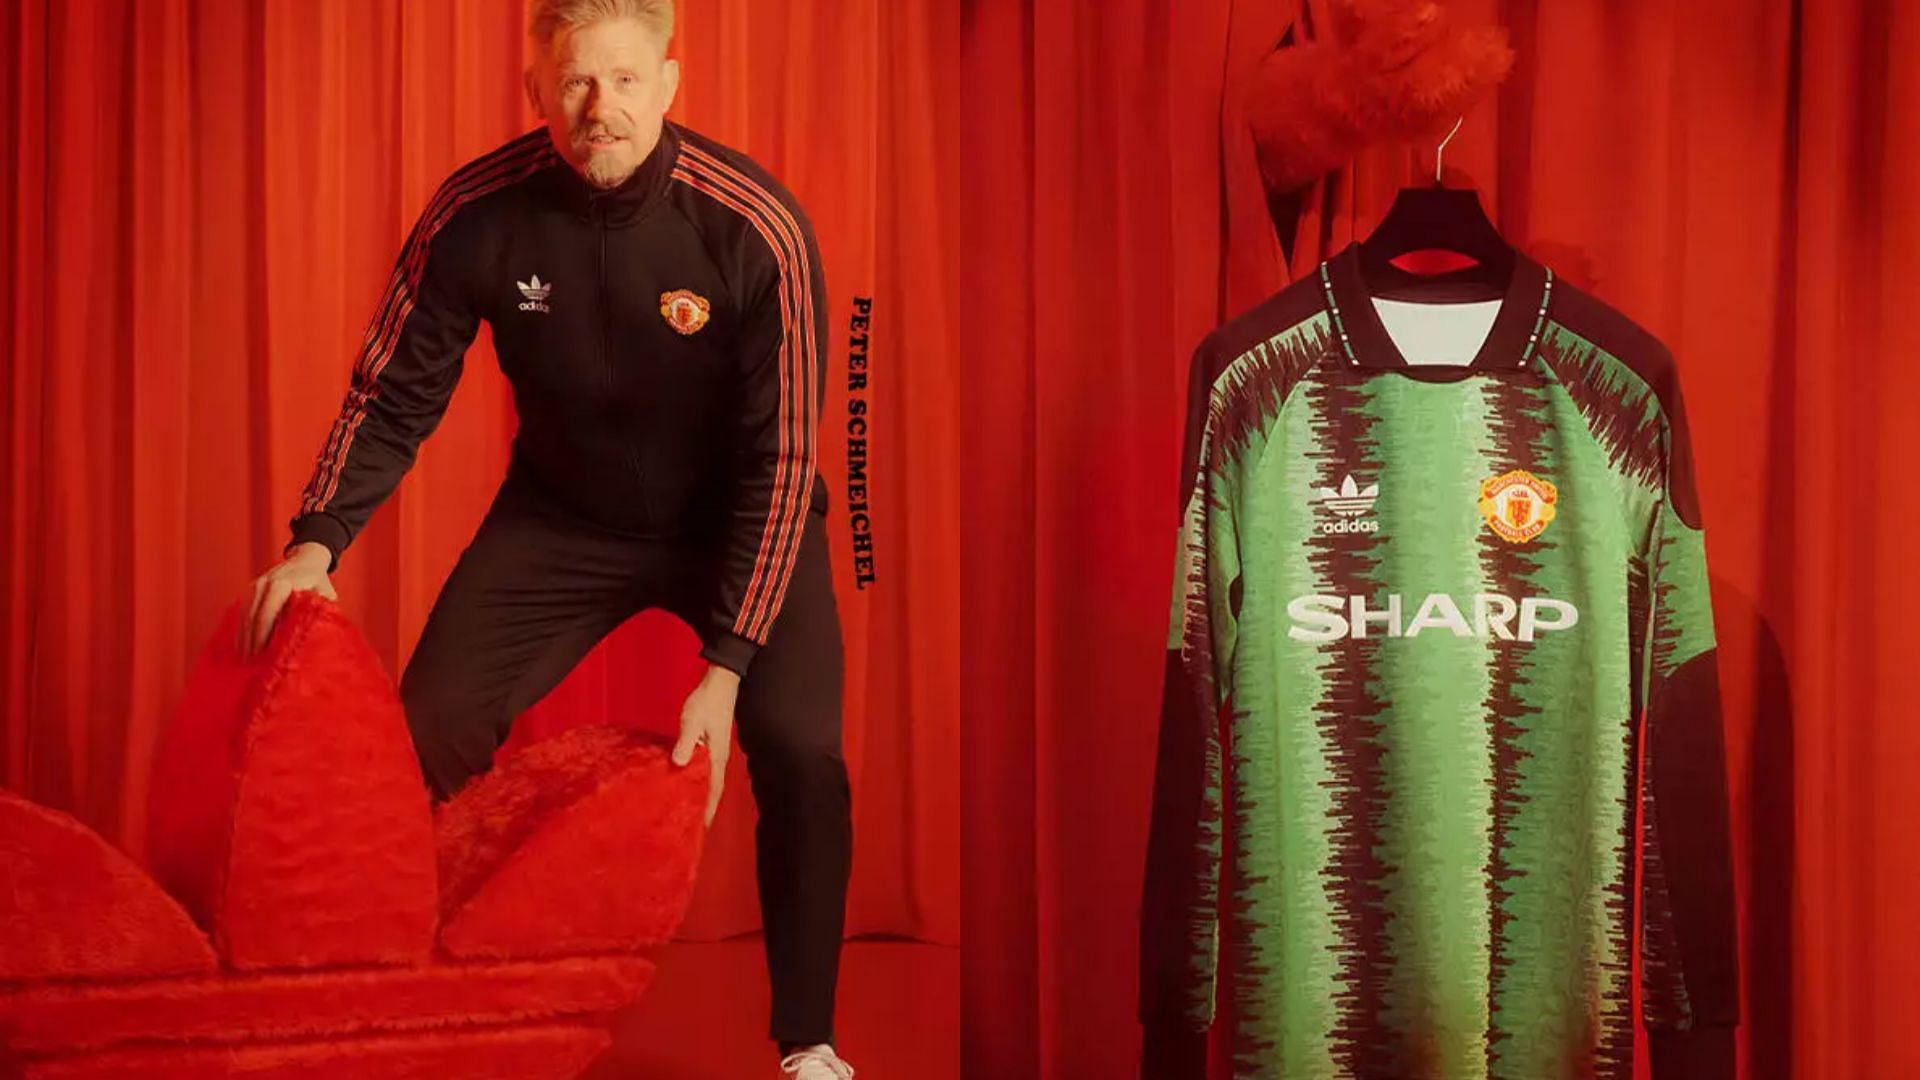 newly released Manchester United x Adidas Originals 90s inspired collection feauting tracksuit and goalkeeper jersey (Image via Adidas)